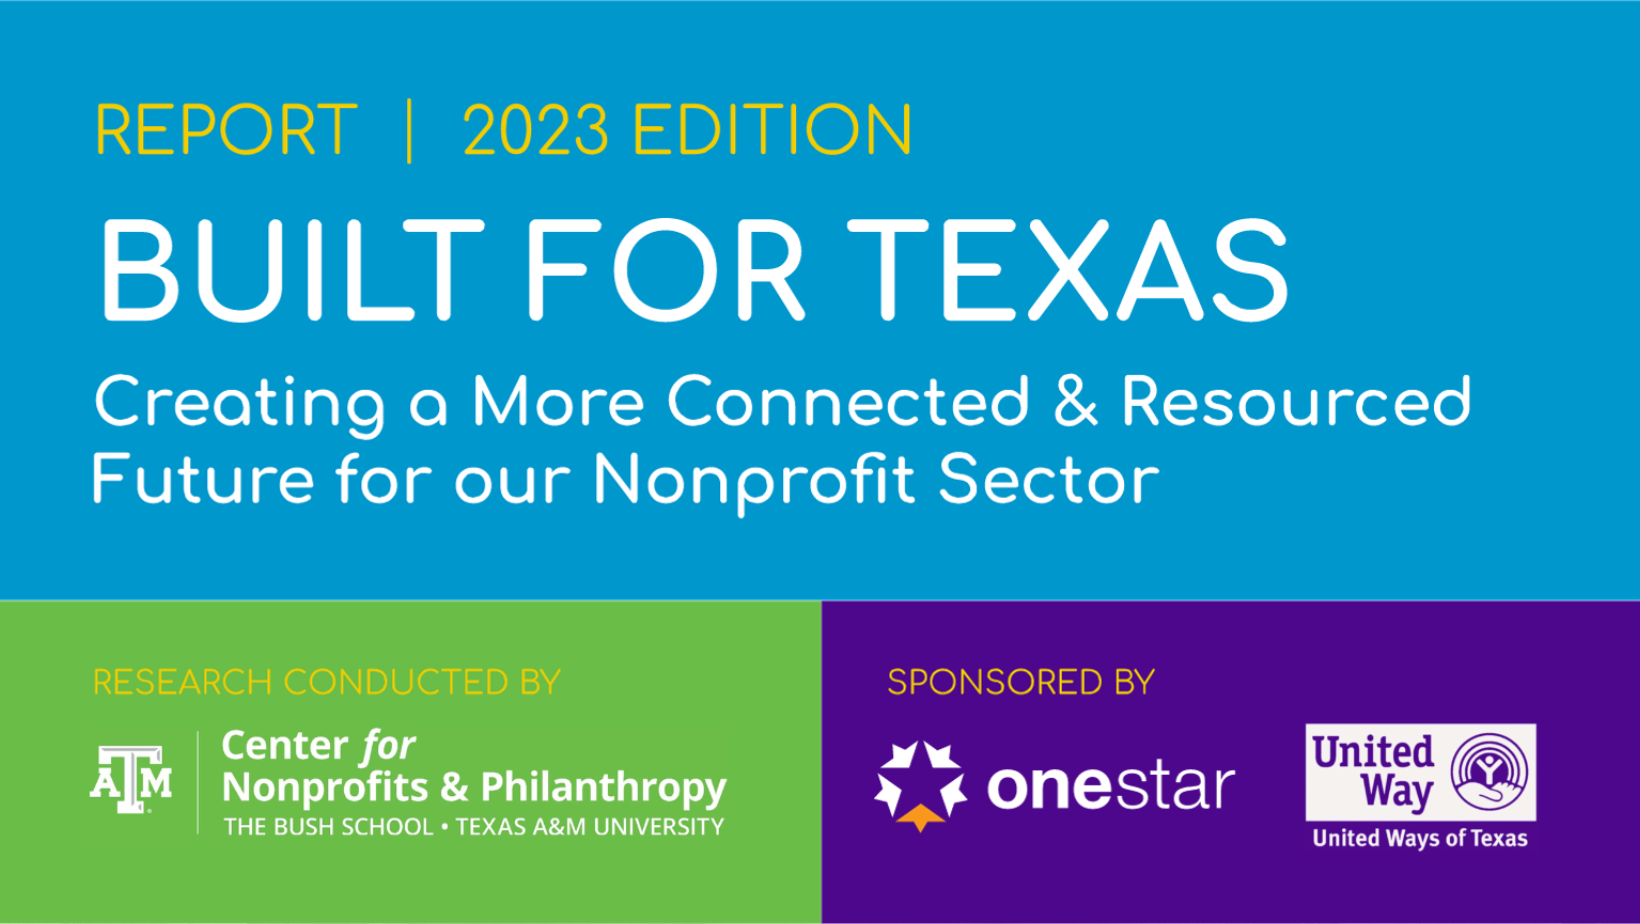 The Center for Nonprofits &amp; Philanthropy works with state partners to release data on challenges and the growth facing the Texas nonprofit sector